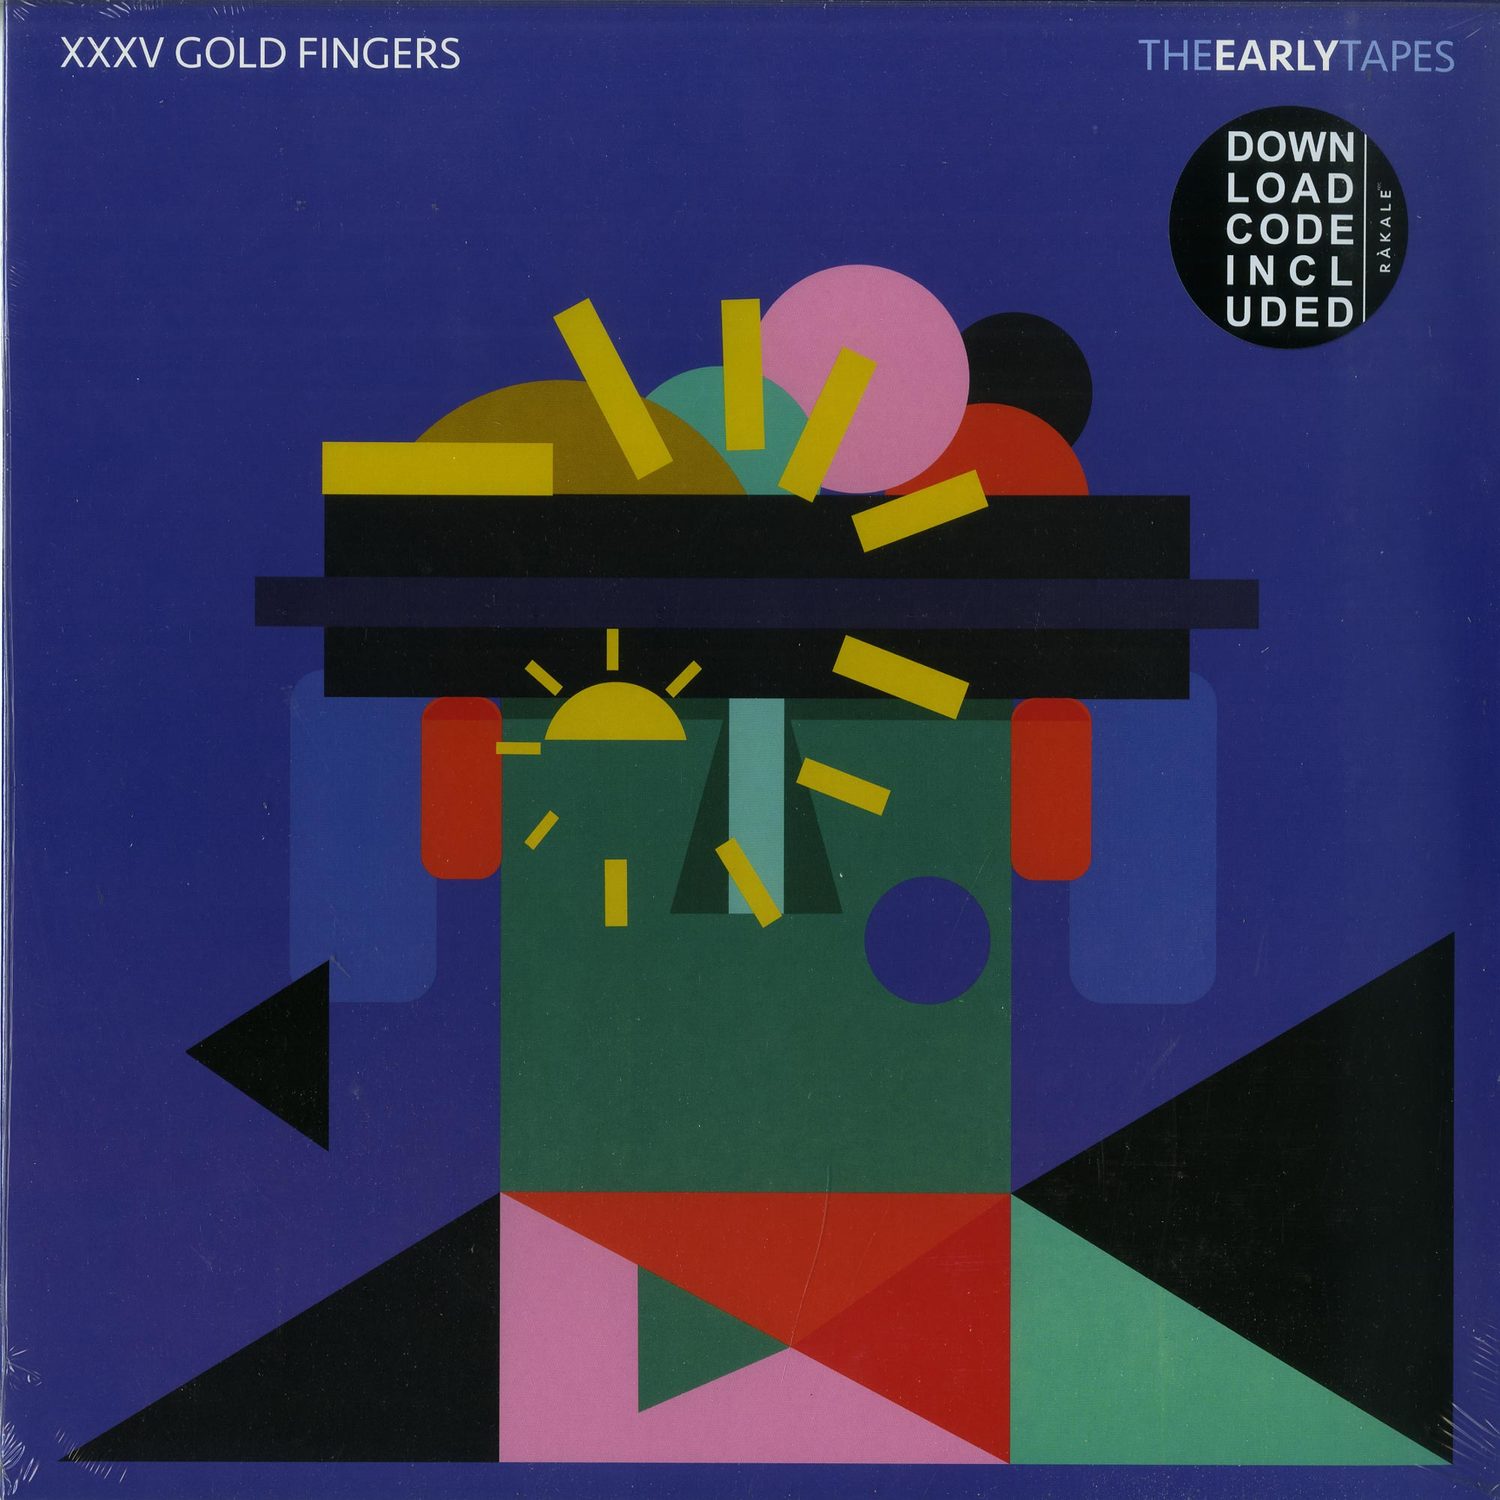 XXXV Gold Fingers - THE EARLY TAPES